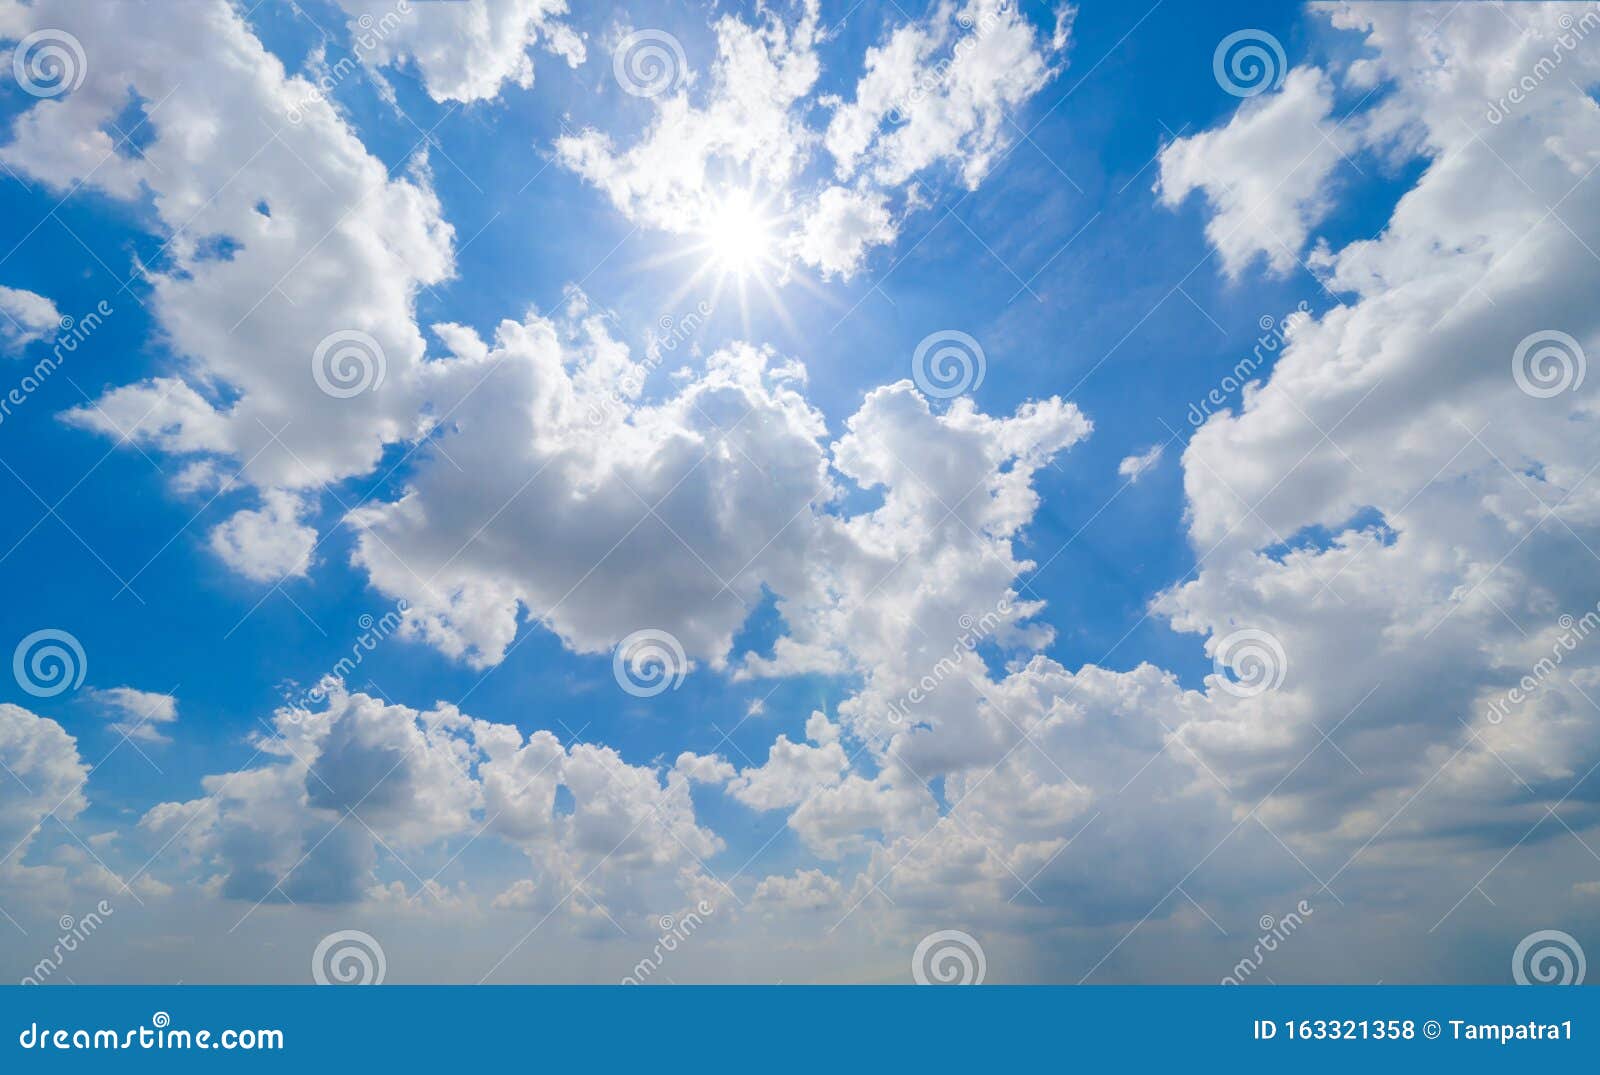 Clear Blue Sky with White Fluffy Clouds in Summer Season at Noon ...